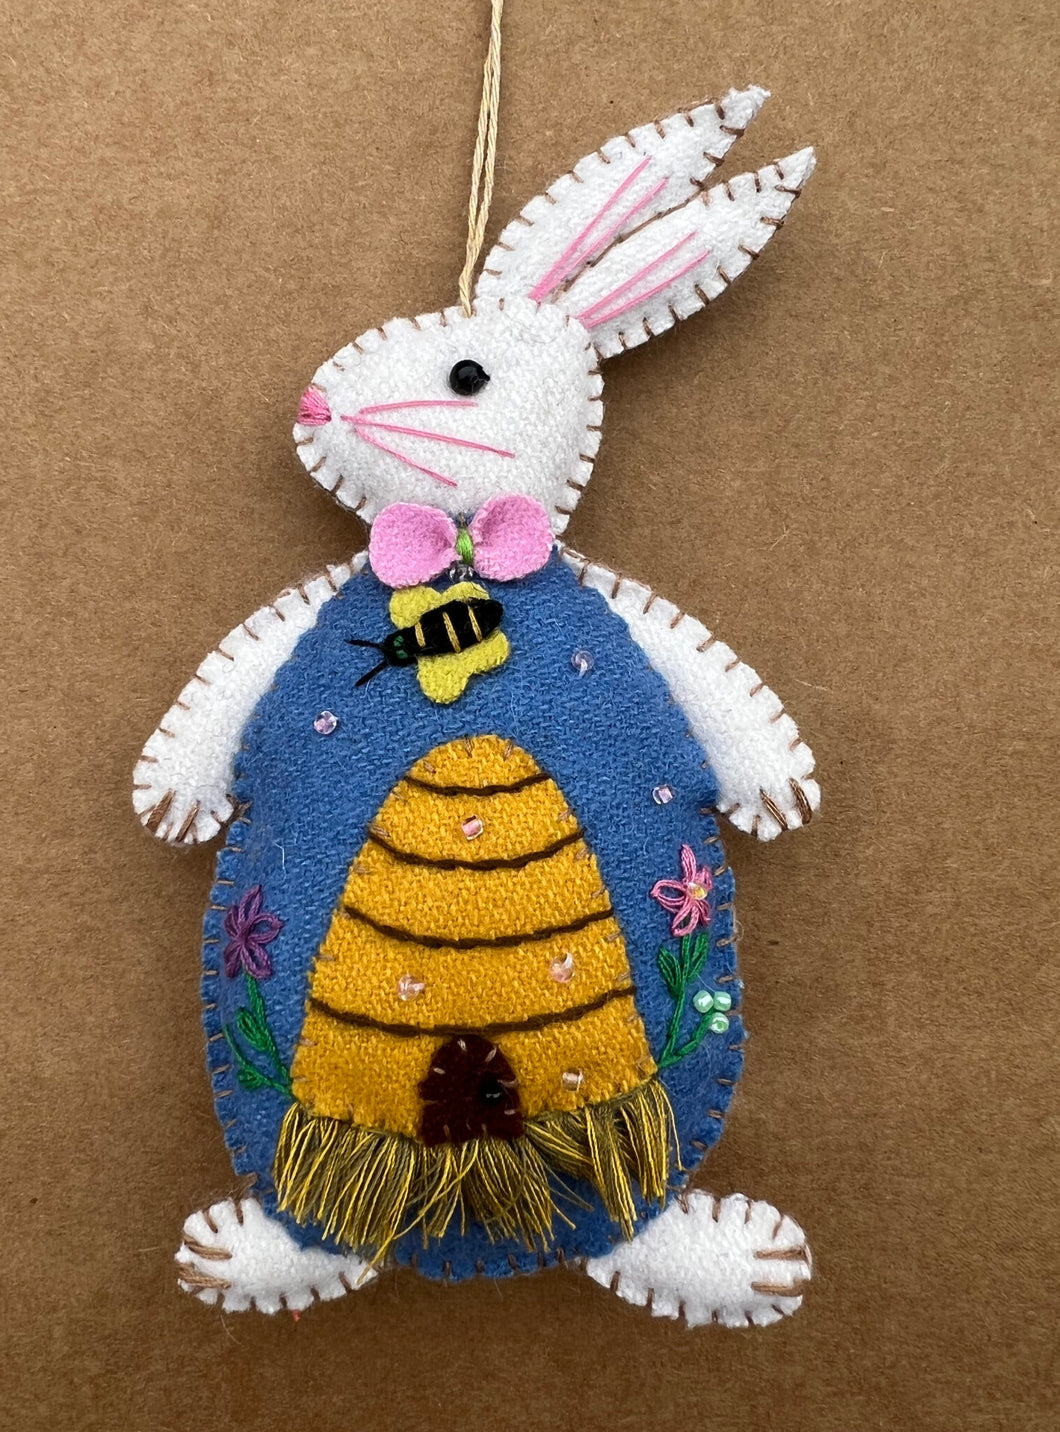 Embroidered Felt Bunny Ornament with Bee Skep